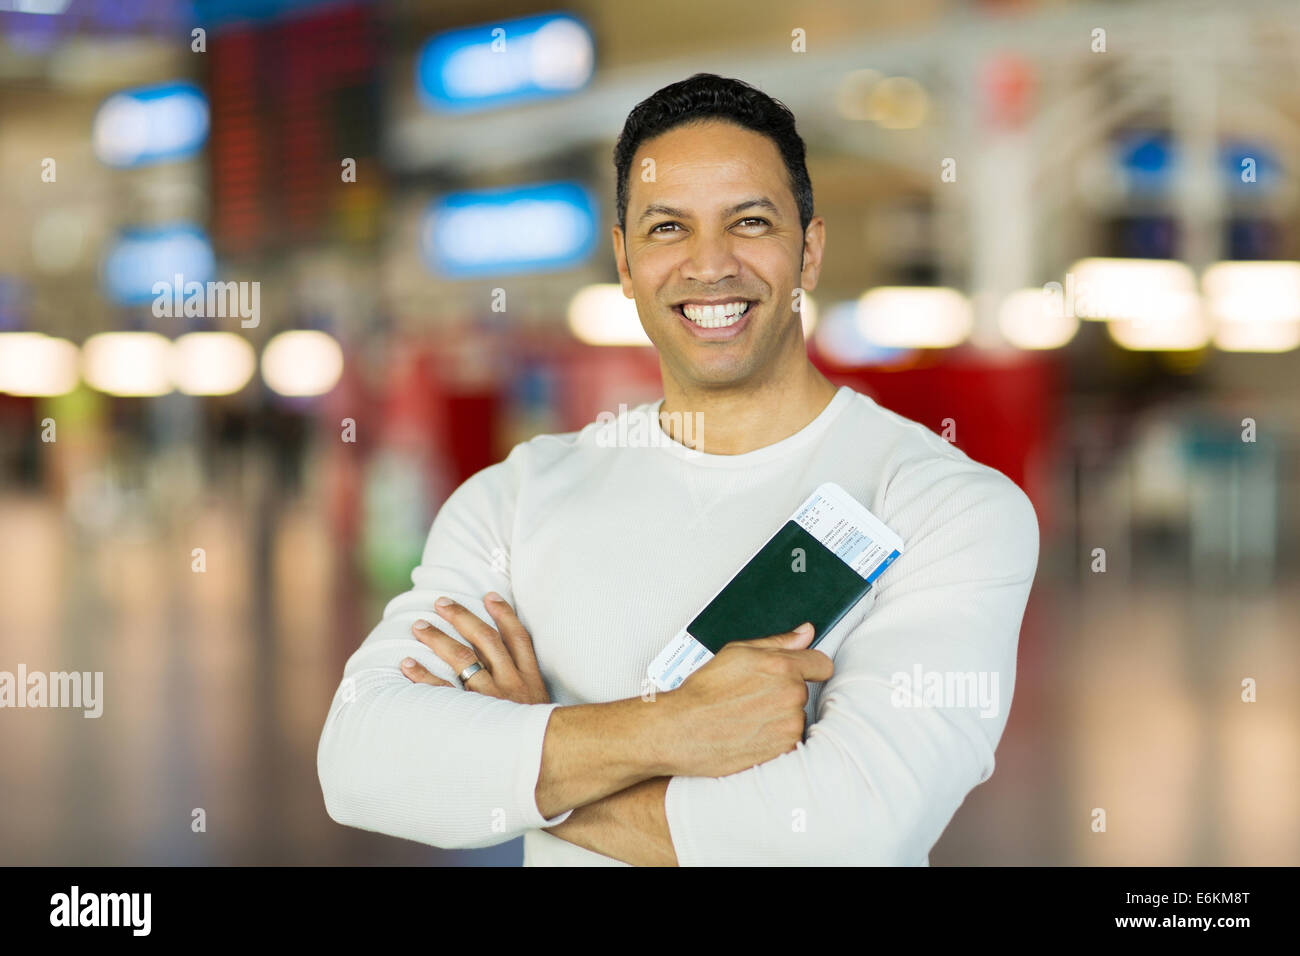 mid age man holding passport and boarding pass at airport Stock Photo